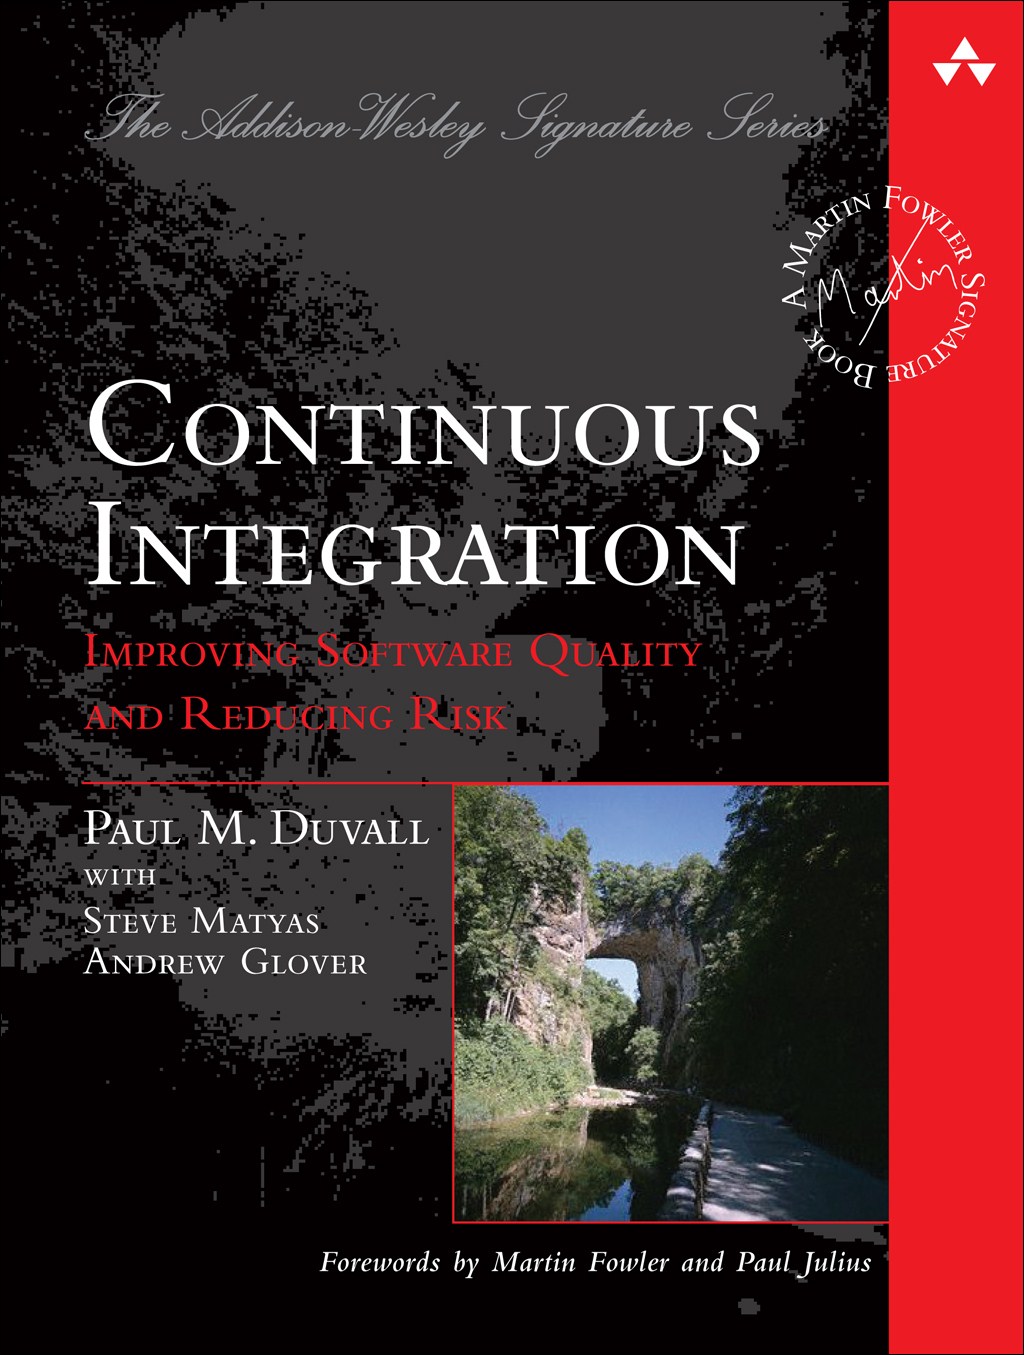 Continuous Integration: Improving Software Quality and Reducing Risk